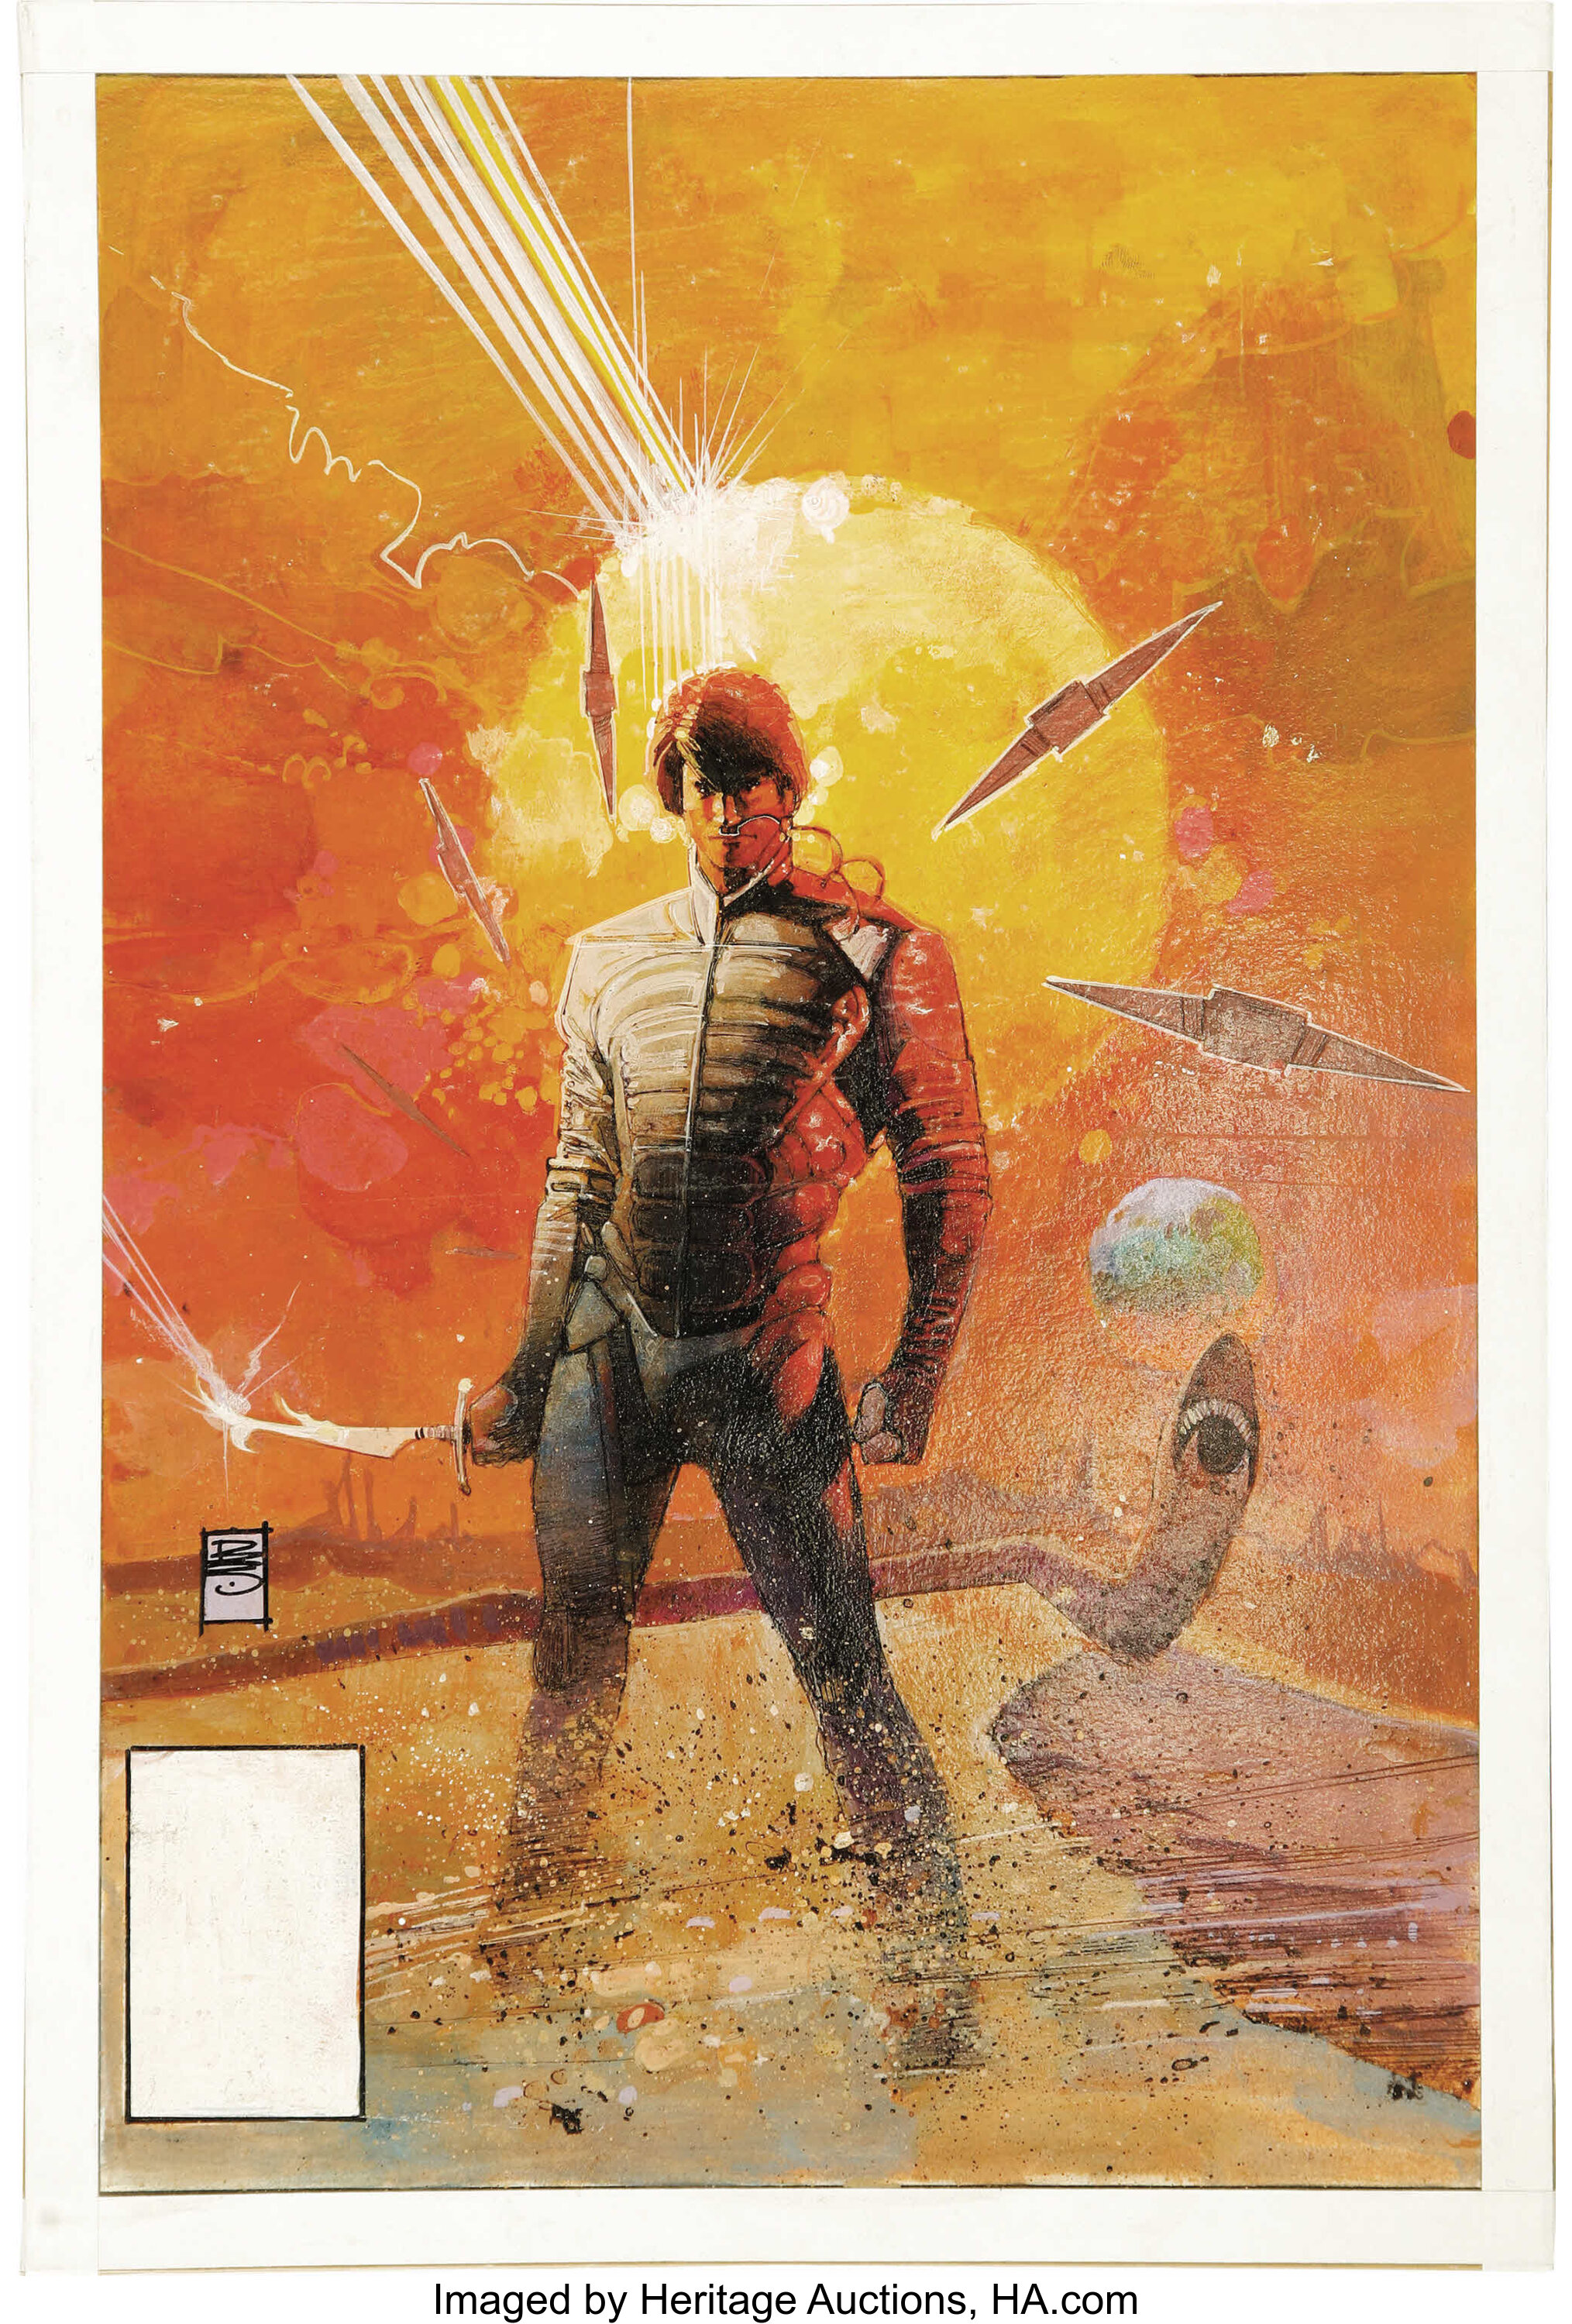 Bill Sienkiewicz - Dune the Official Comic Book Paperback Cover | Lot